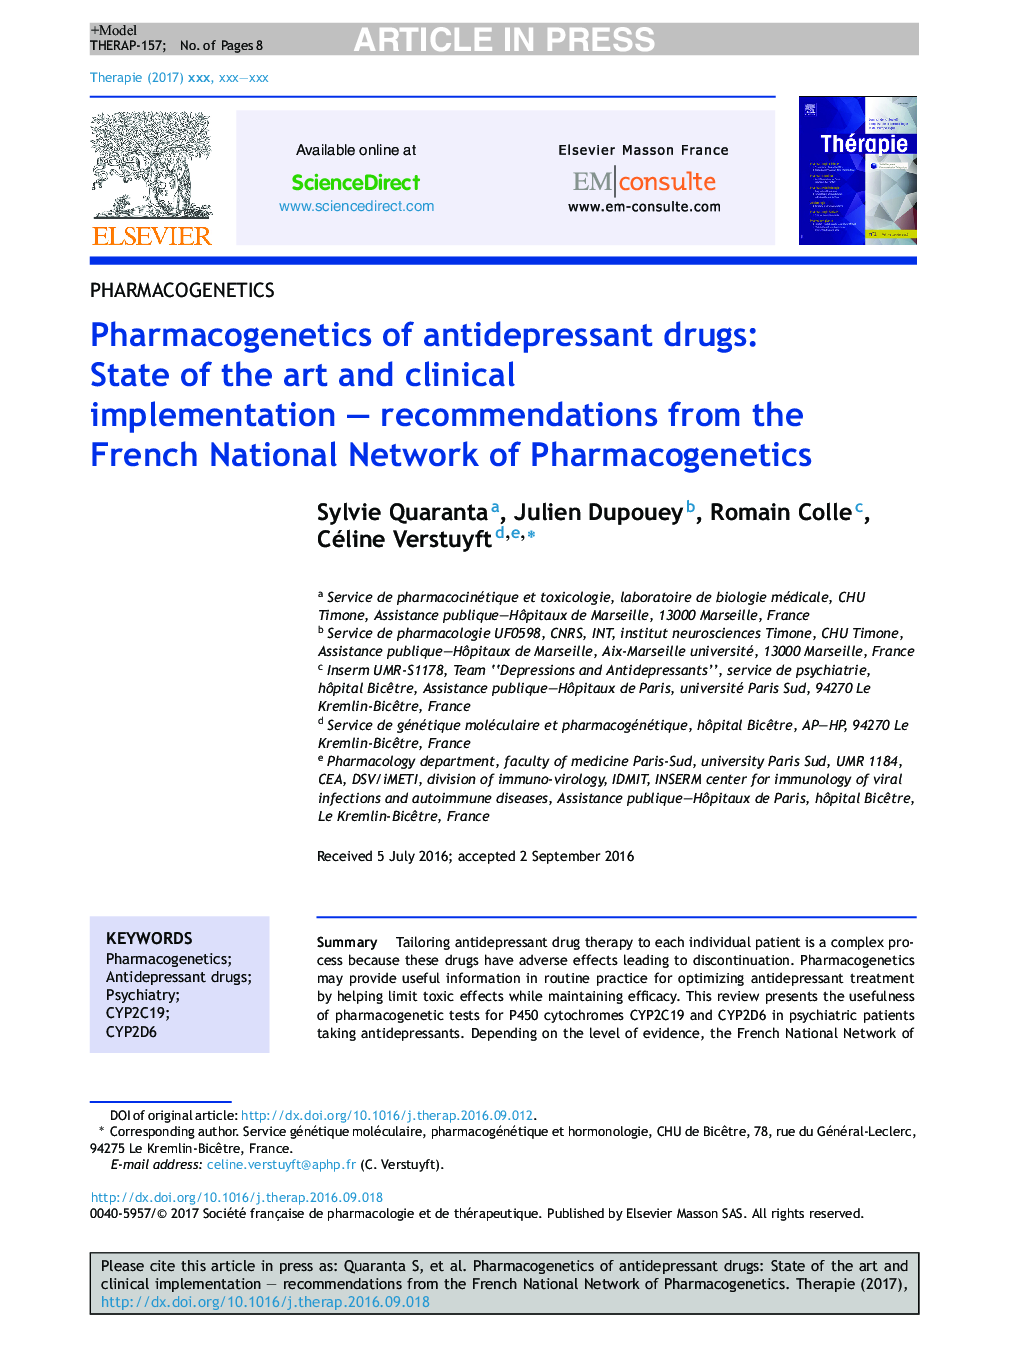 Pharmacogenetics of antidepressant drugs: State of the art and clinical implementation - recommendations from the French National Network of Pharmacogenetics